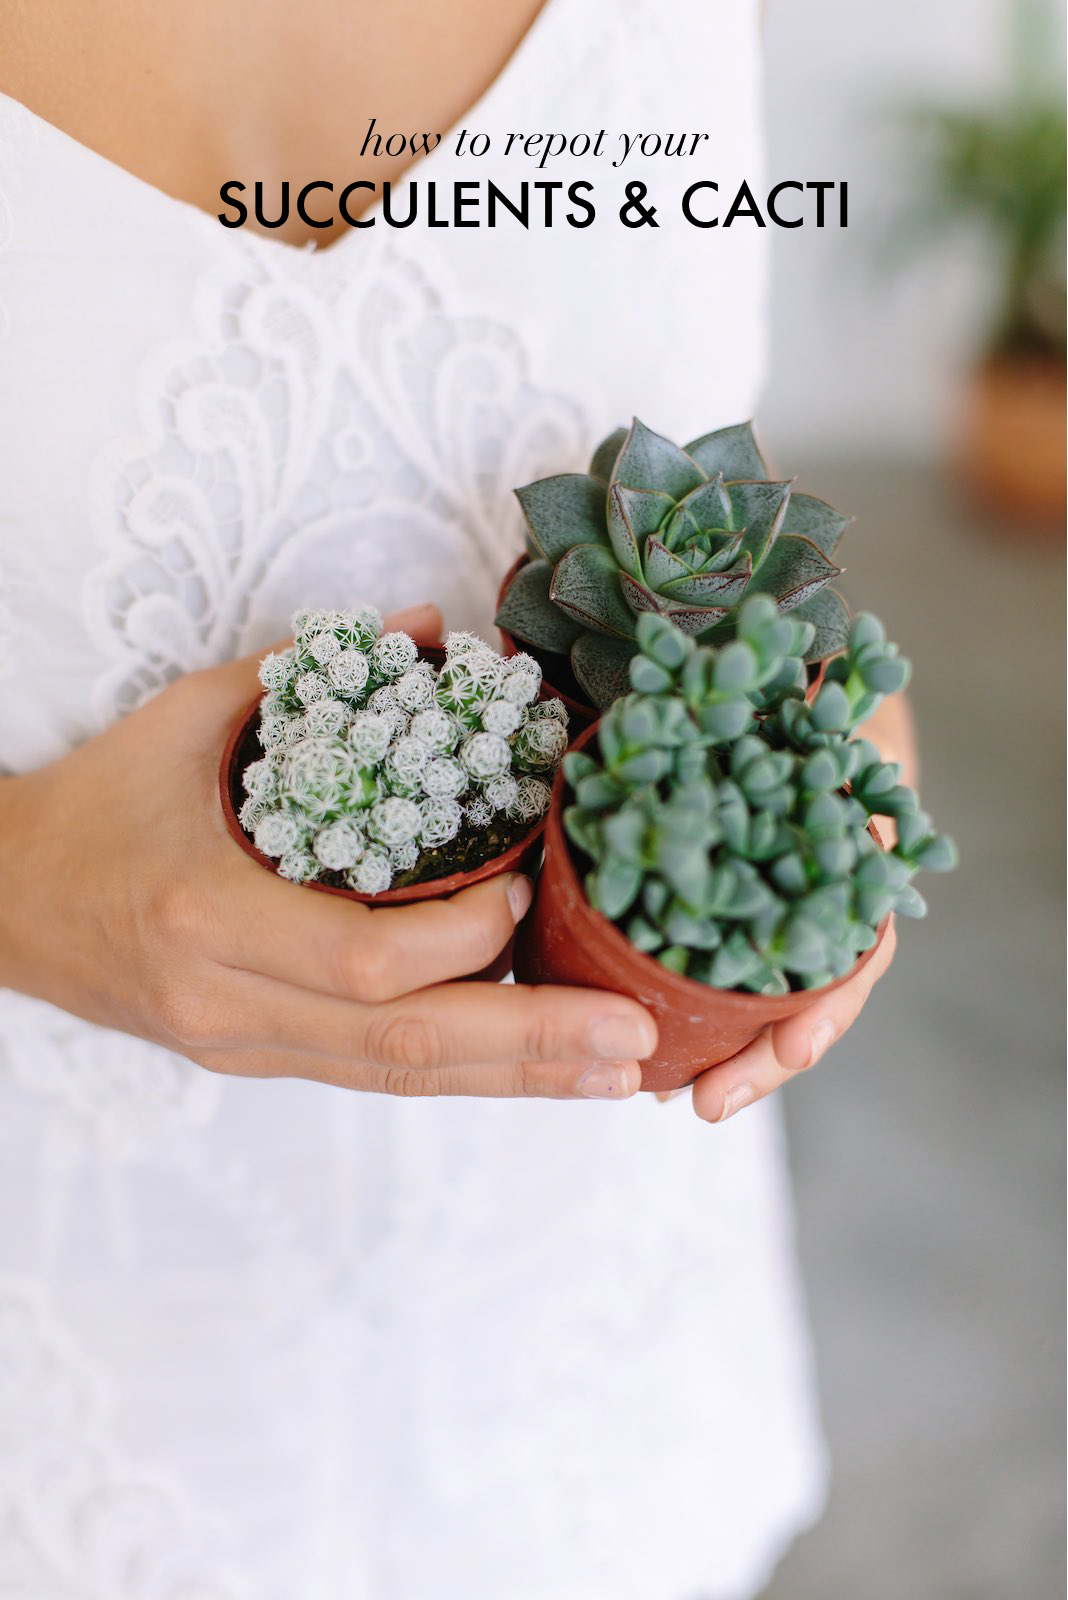 How To Repot Succulents And Cacti